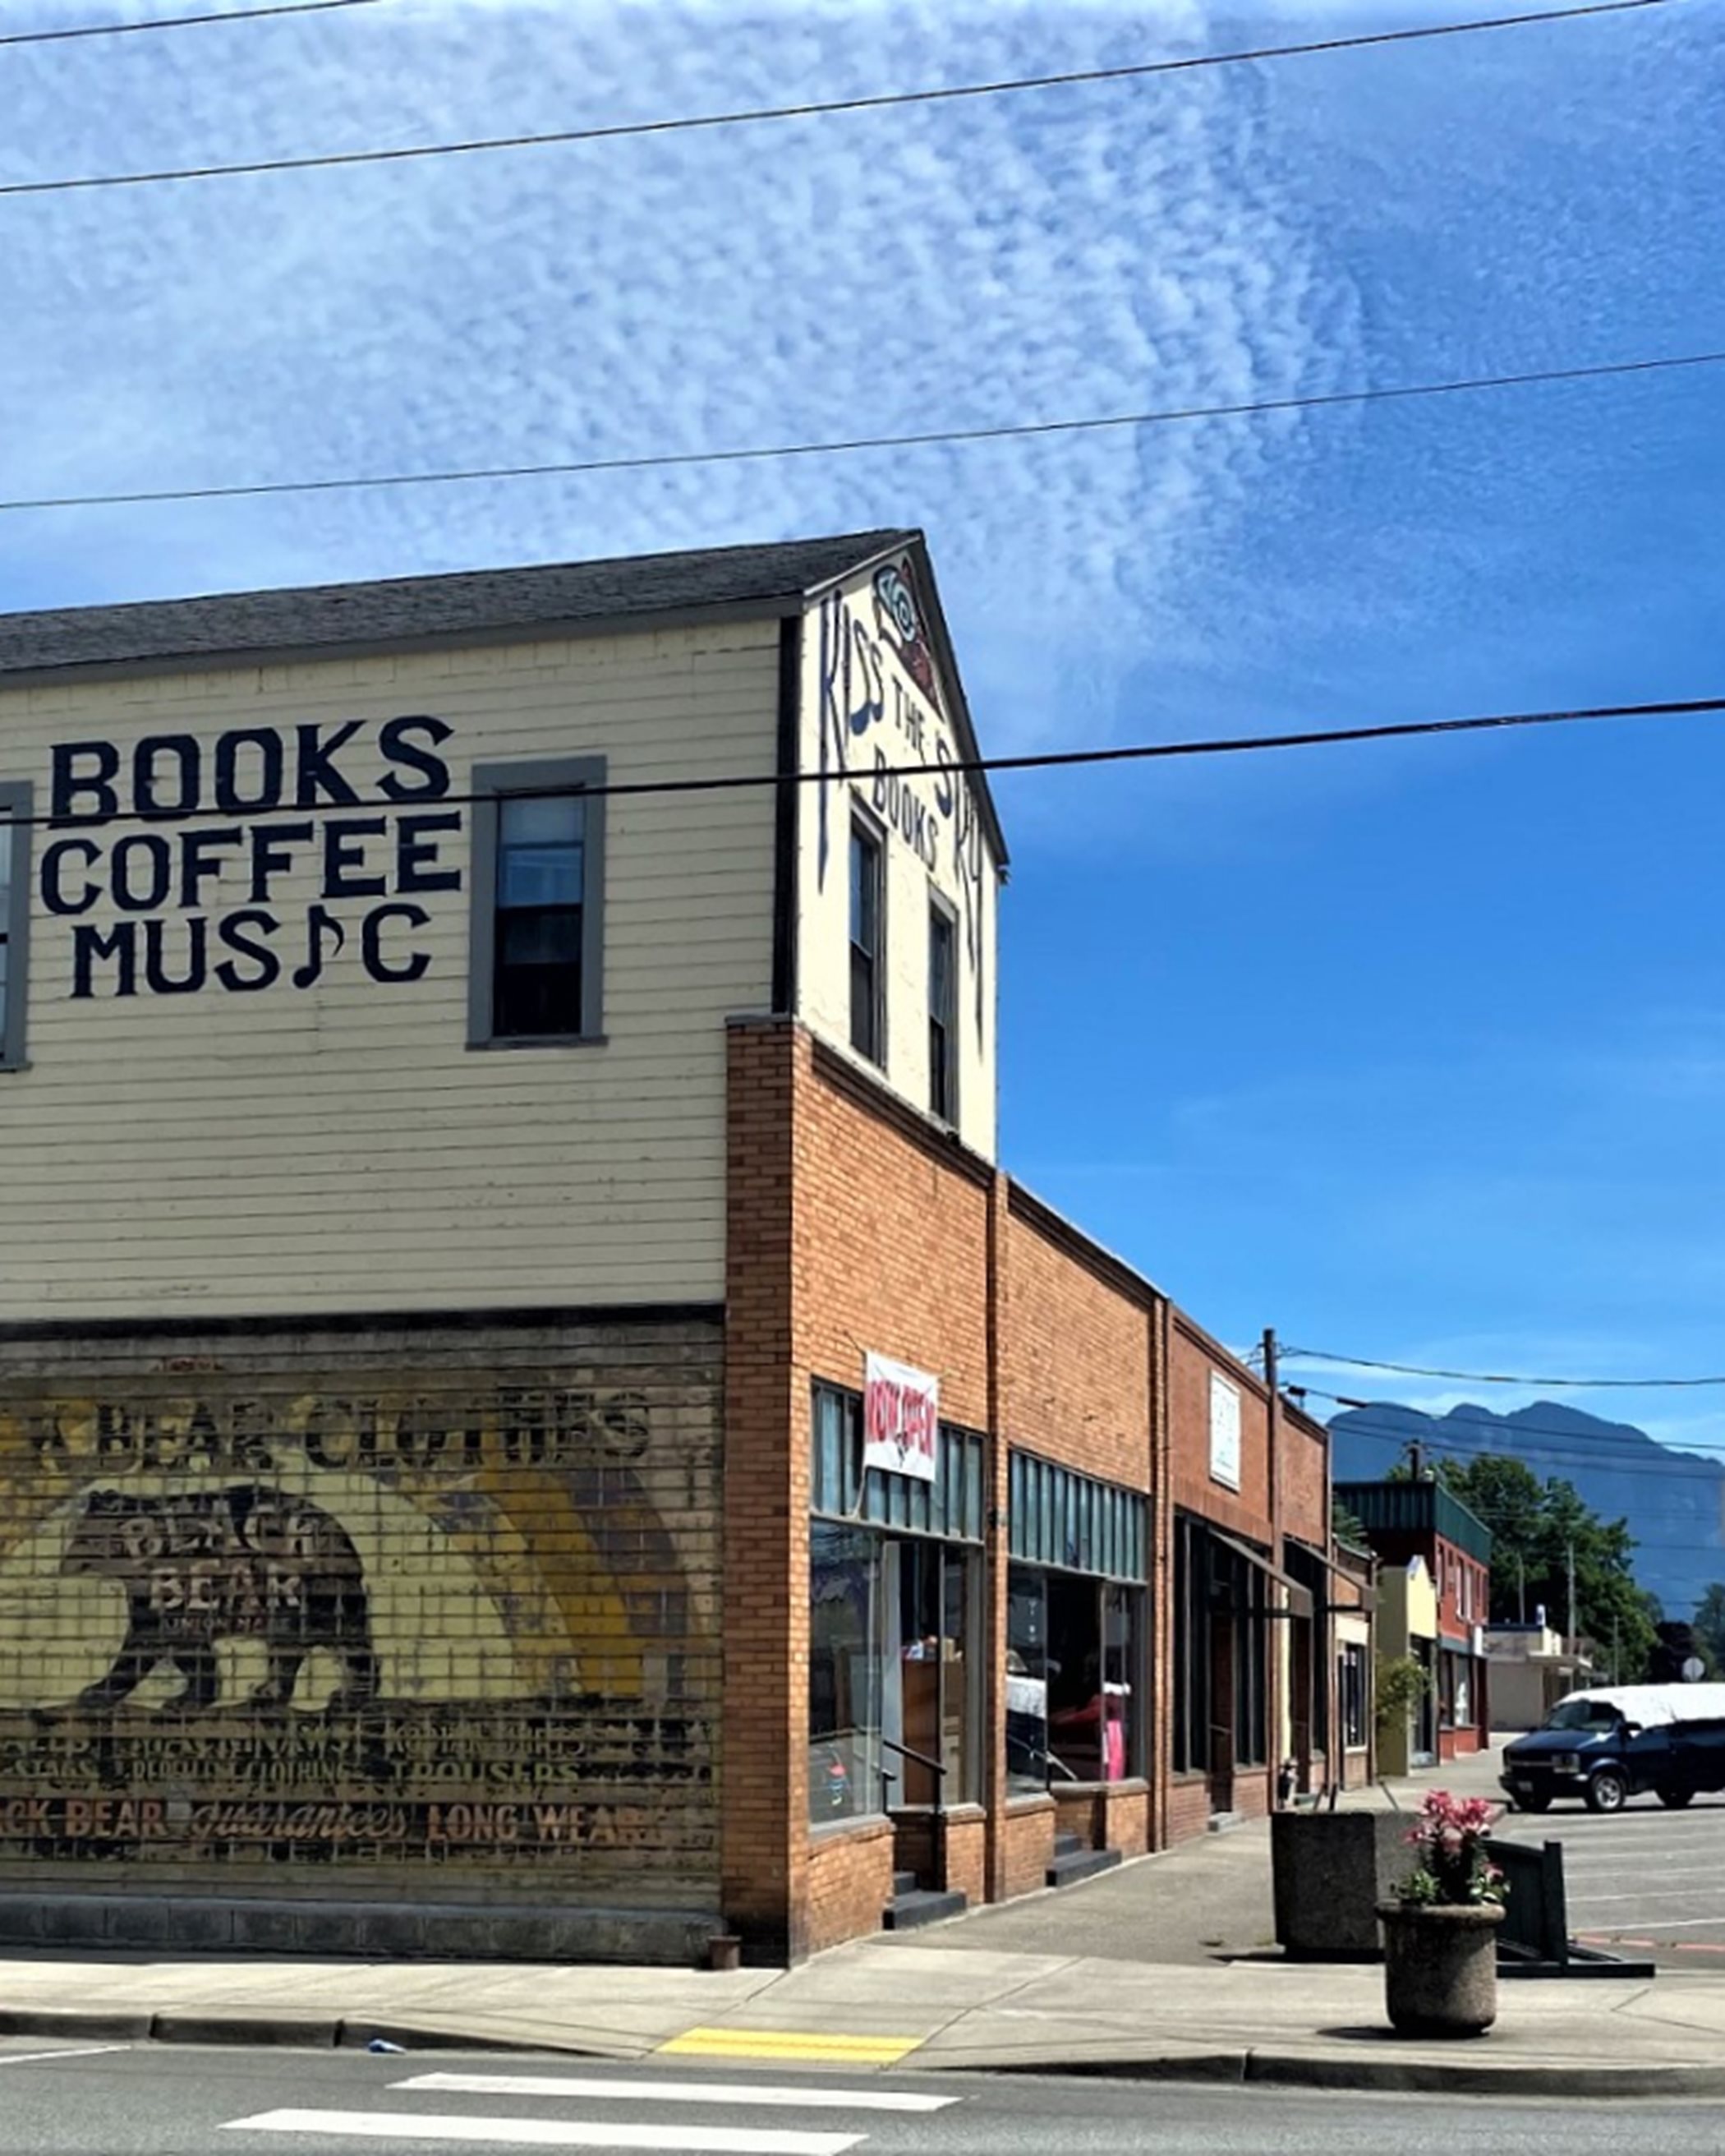 Streetview of books and music shop